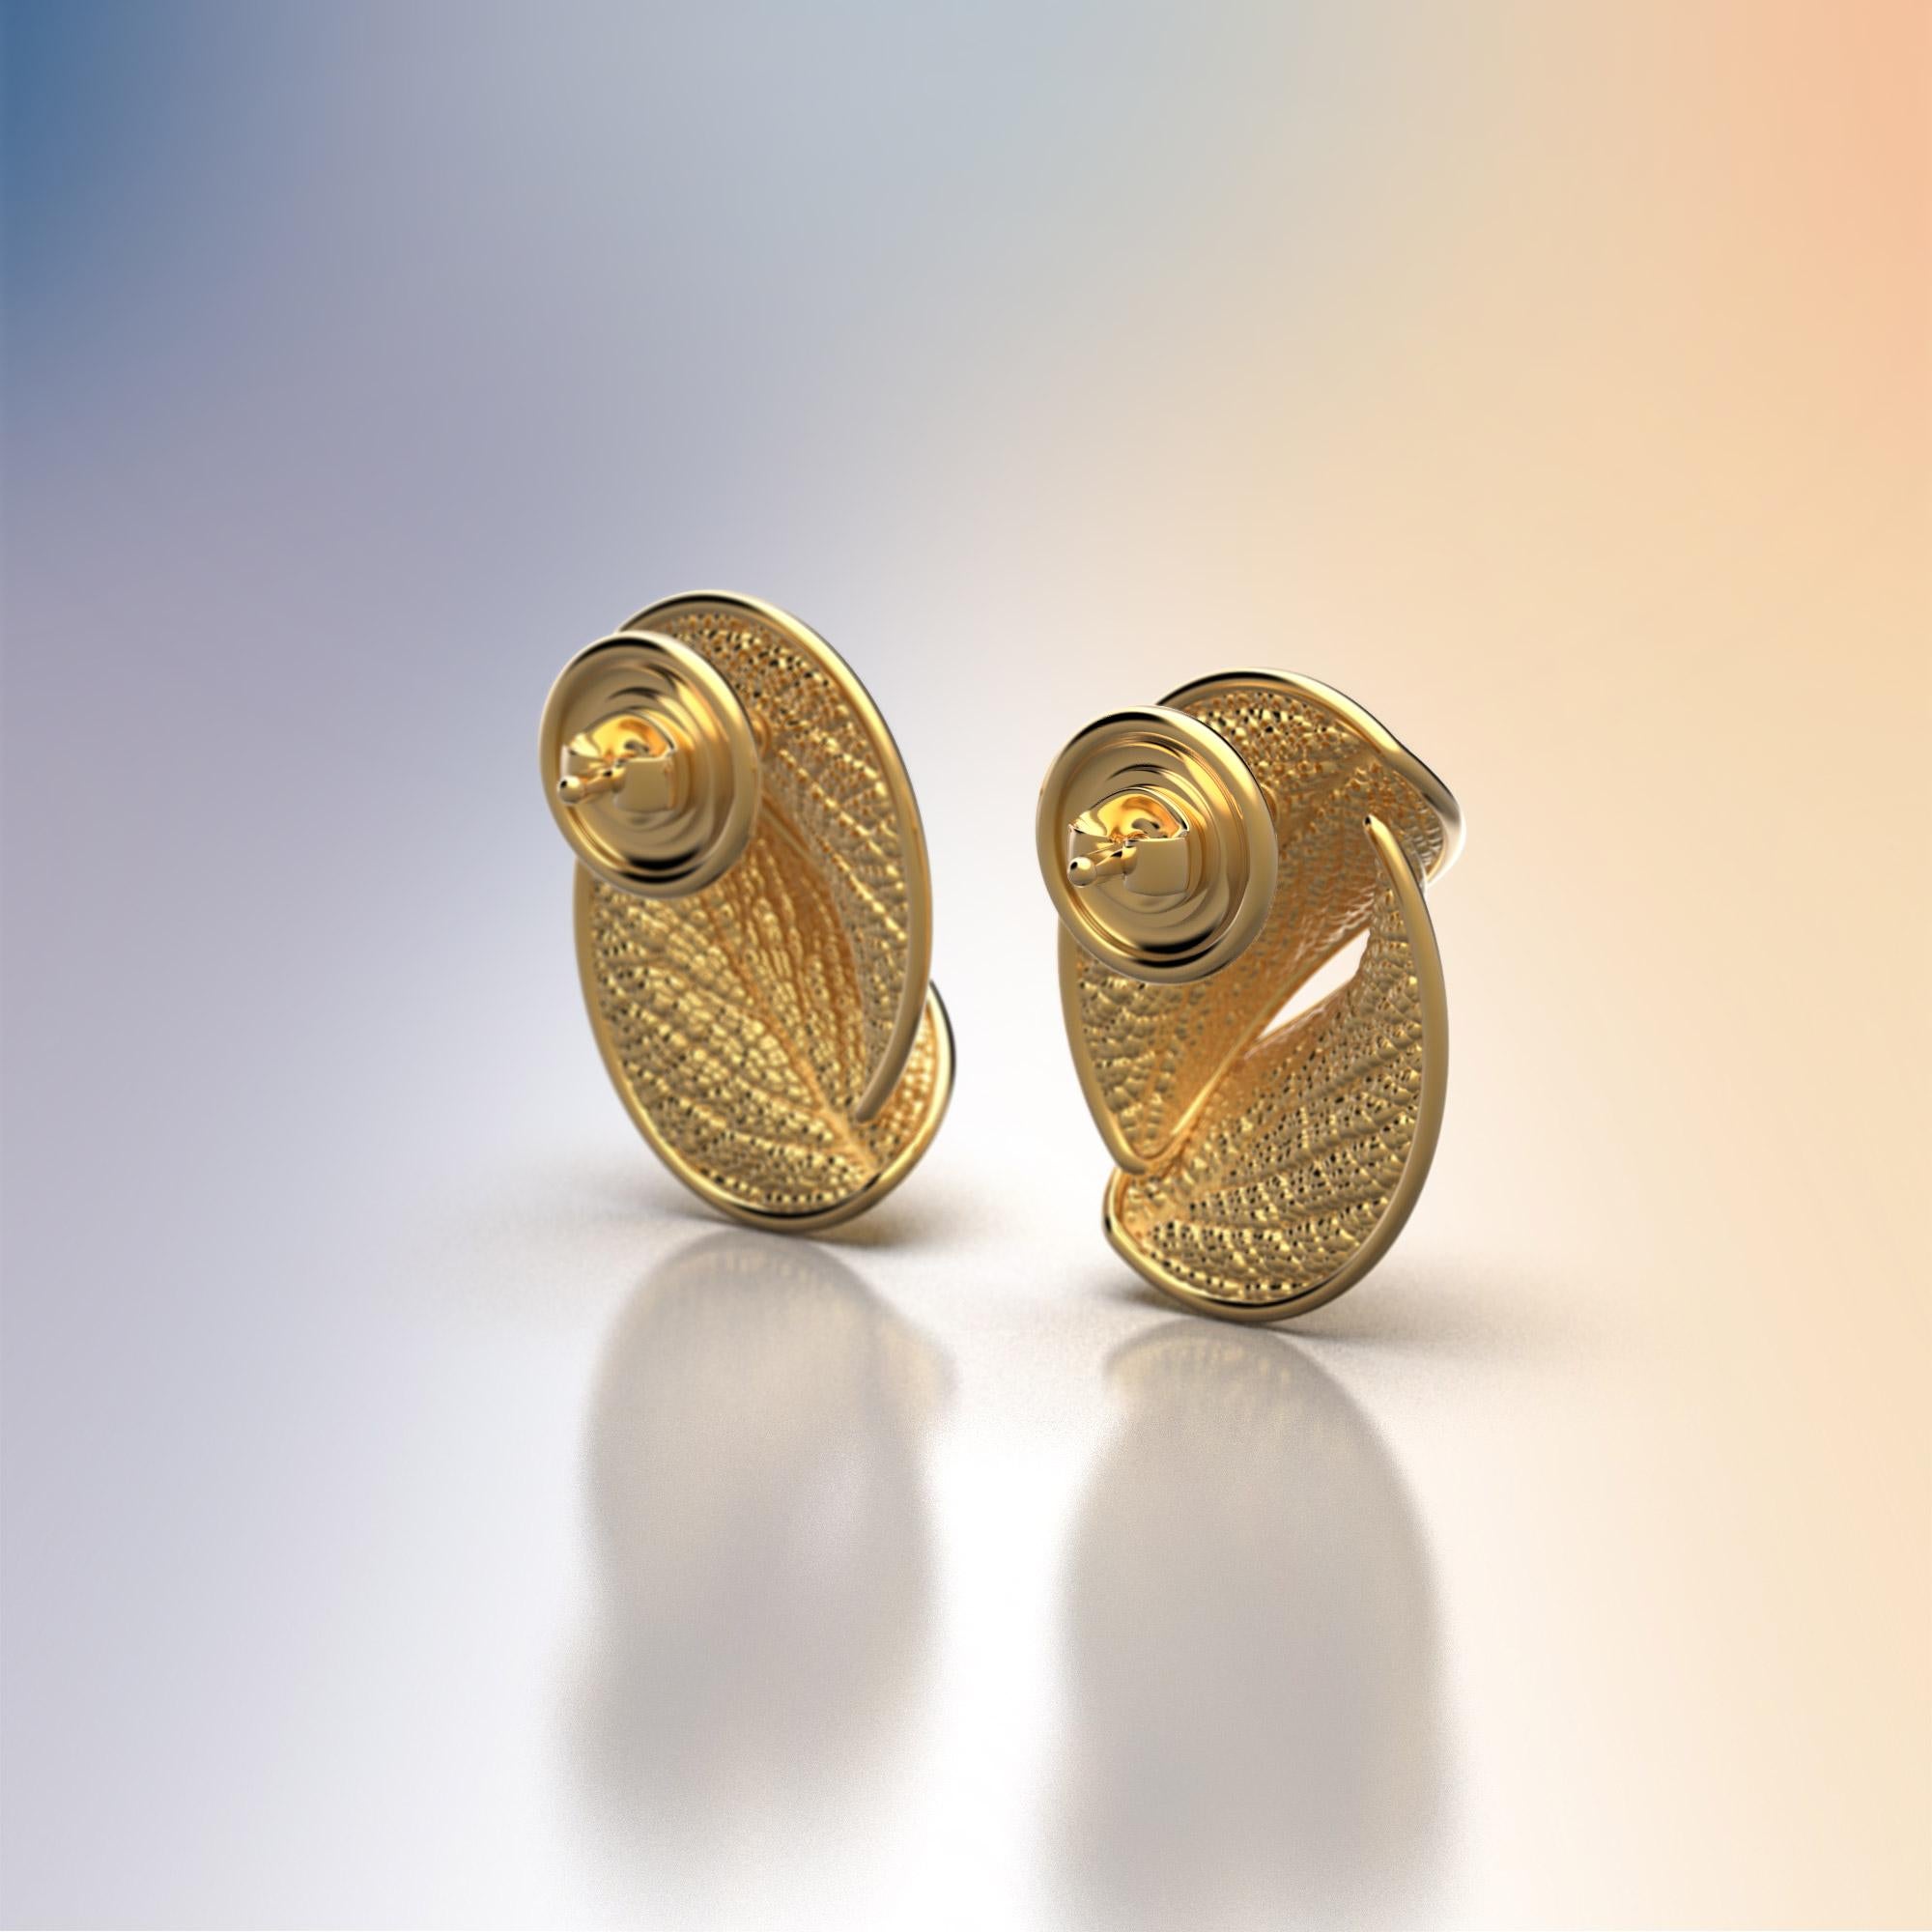 Women's Italian Jewelry 18k Gold Leaf Stud Earrings Made in Italy by Oltremare Gioielli For Sale